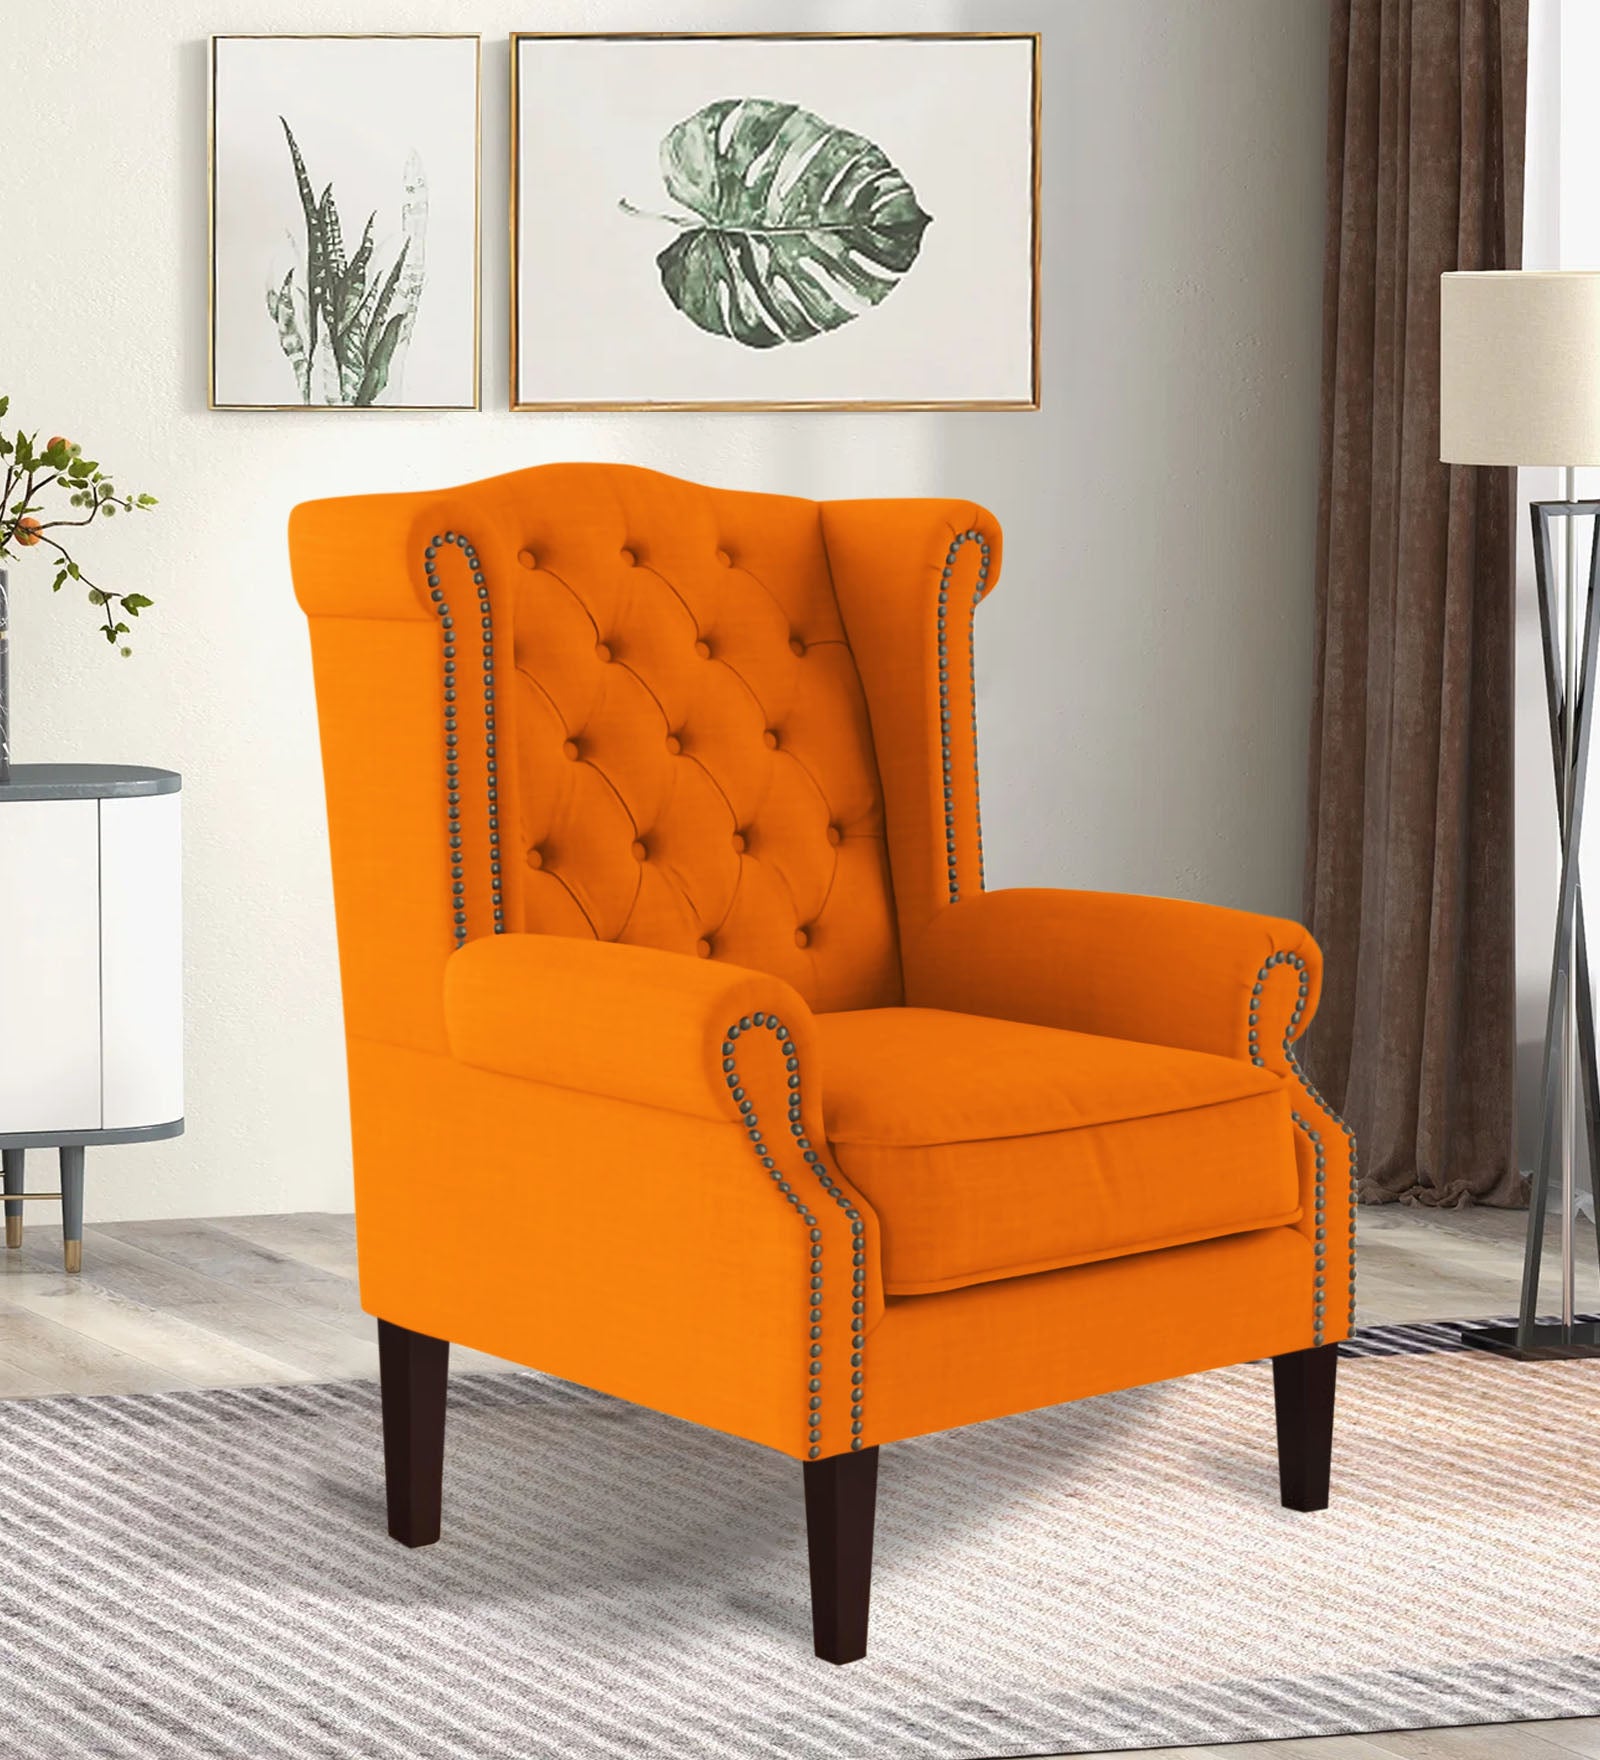 Nottage Fabric Wing Chair in Vivid Orange Colour